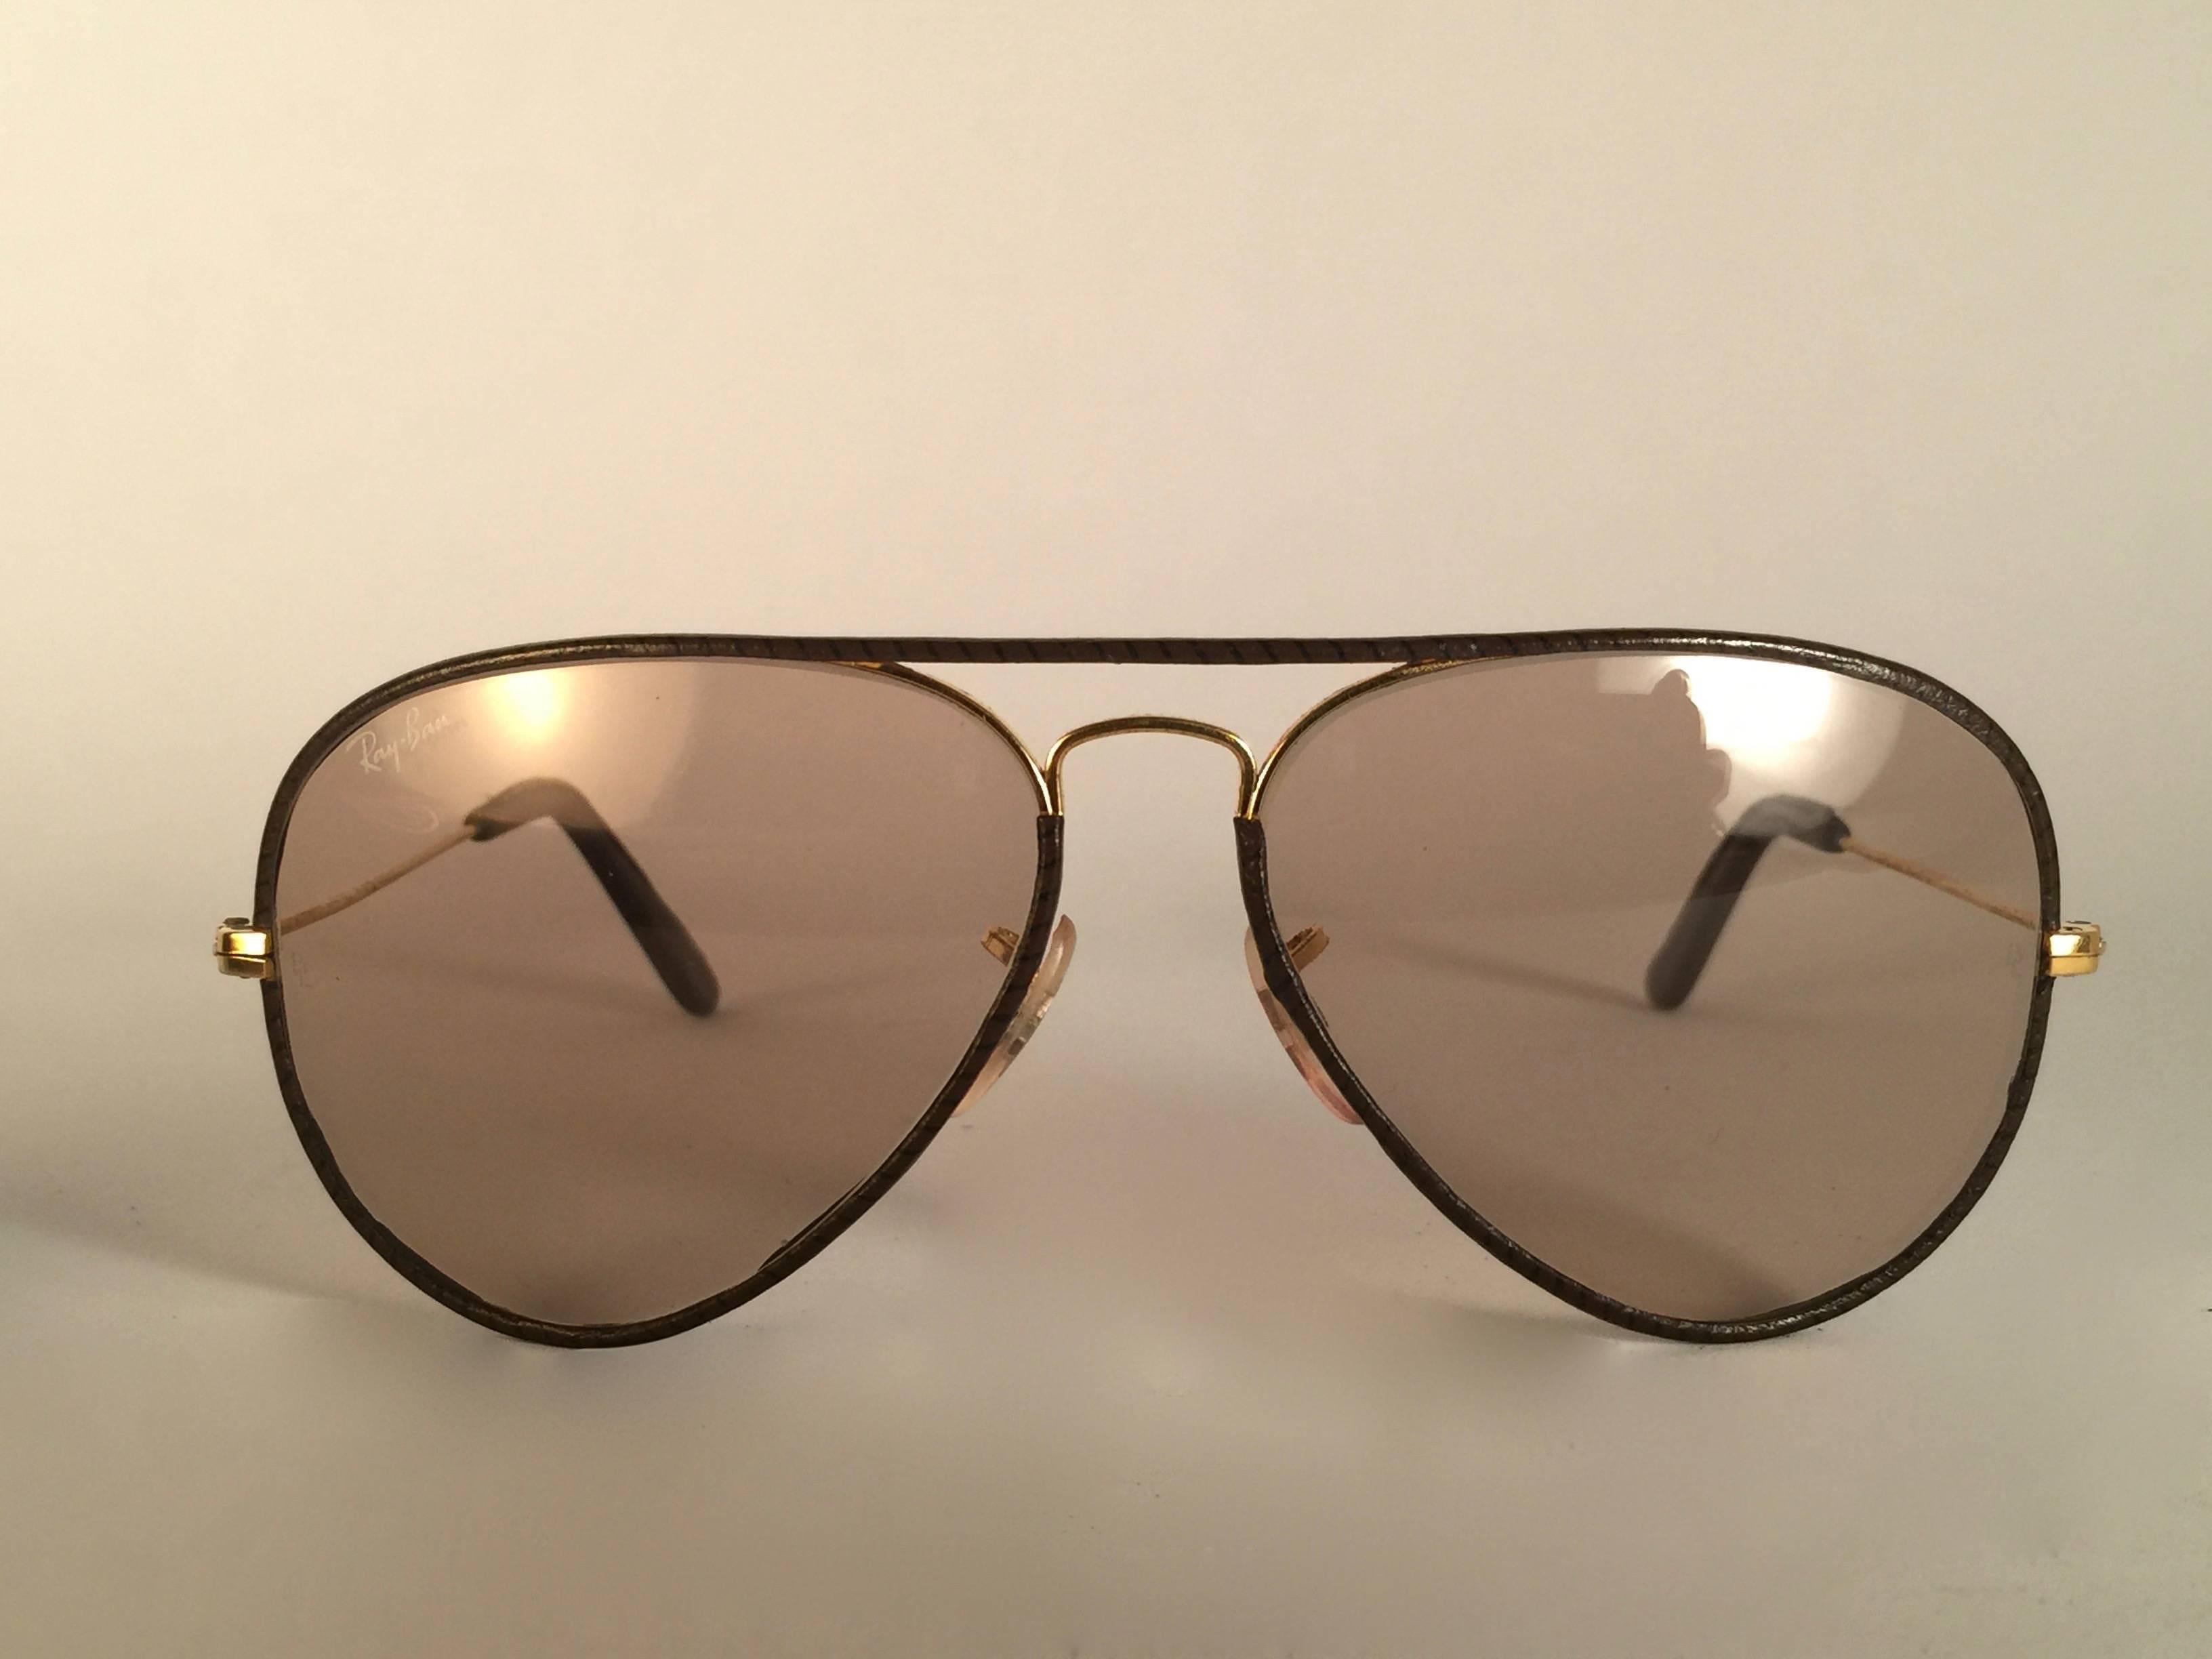 New Vintage Ray Ban Leathers Aviator 58mm in tobacco brown leather with gold metal combination frame sporting light changeable to brown lenses with white Ray Ban logo. B&L etched in the lenses, so mid 1970's. Comes with its original Ray Ban B&L case